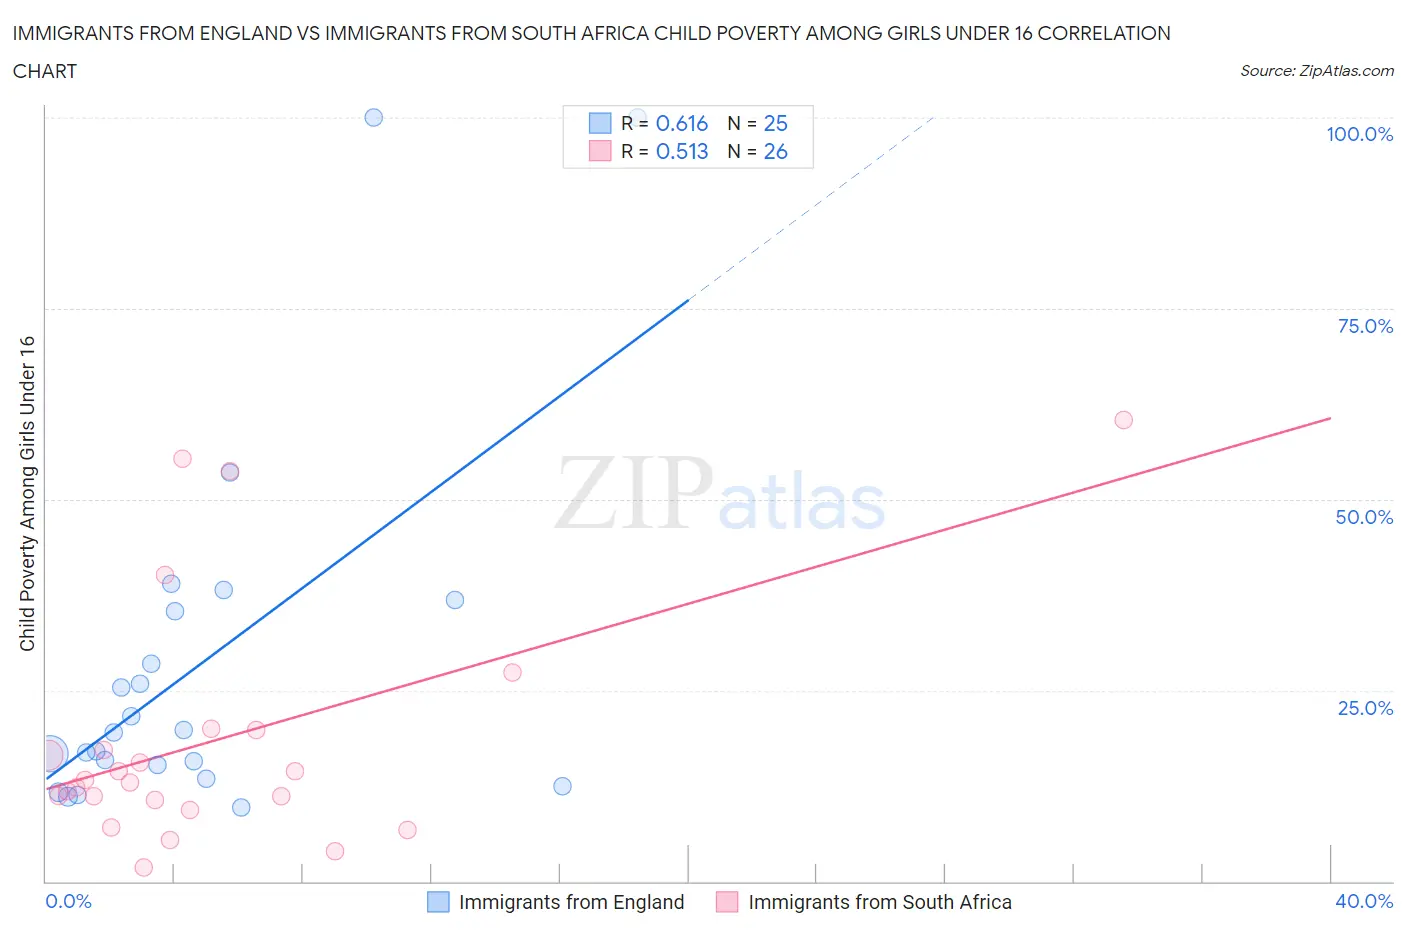 Immigrants from England vs Immigrants from South Africa Child Poverty Among Girls Under 16